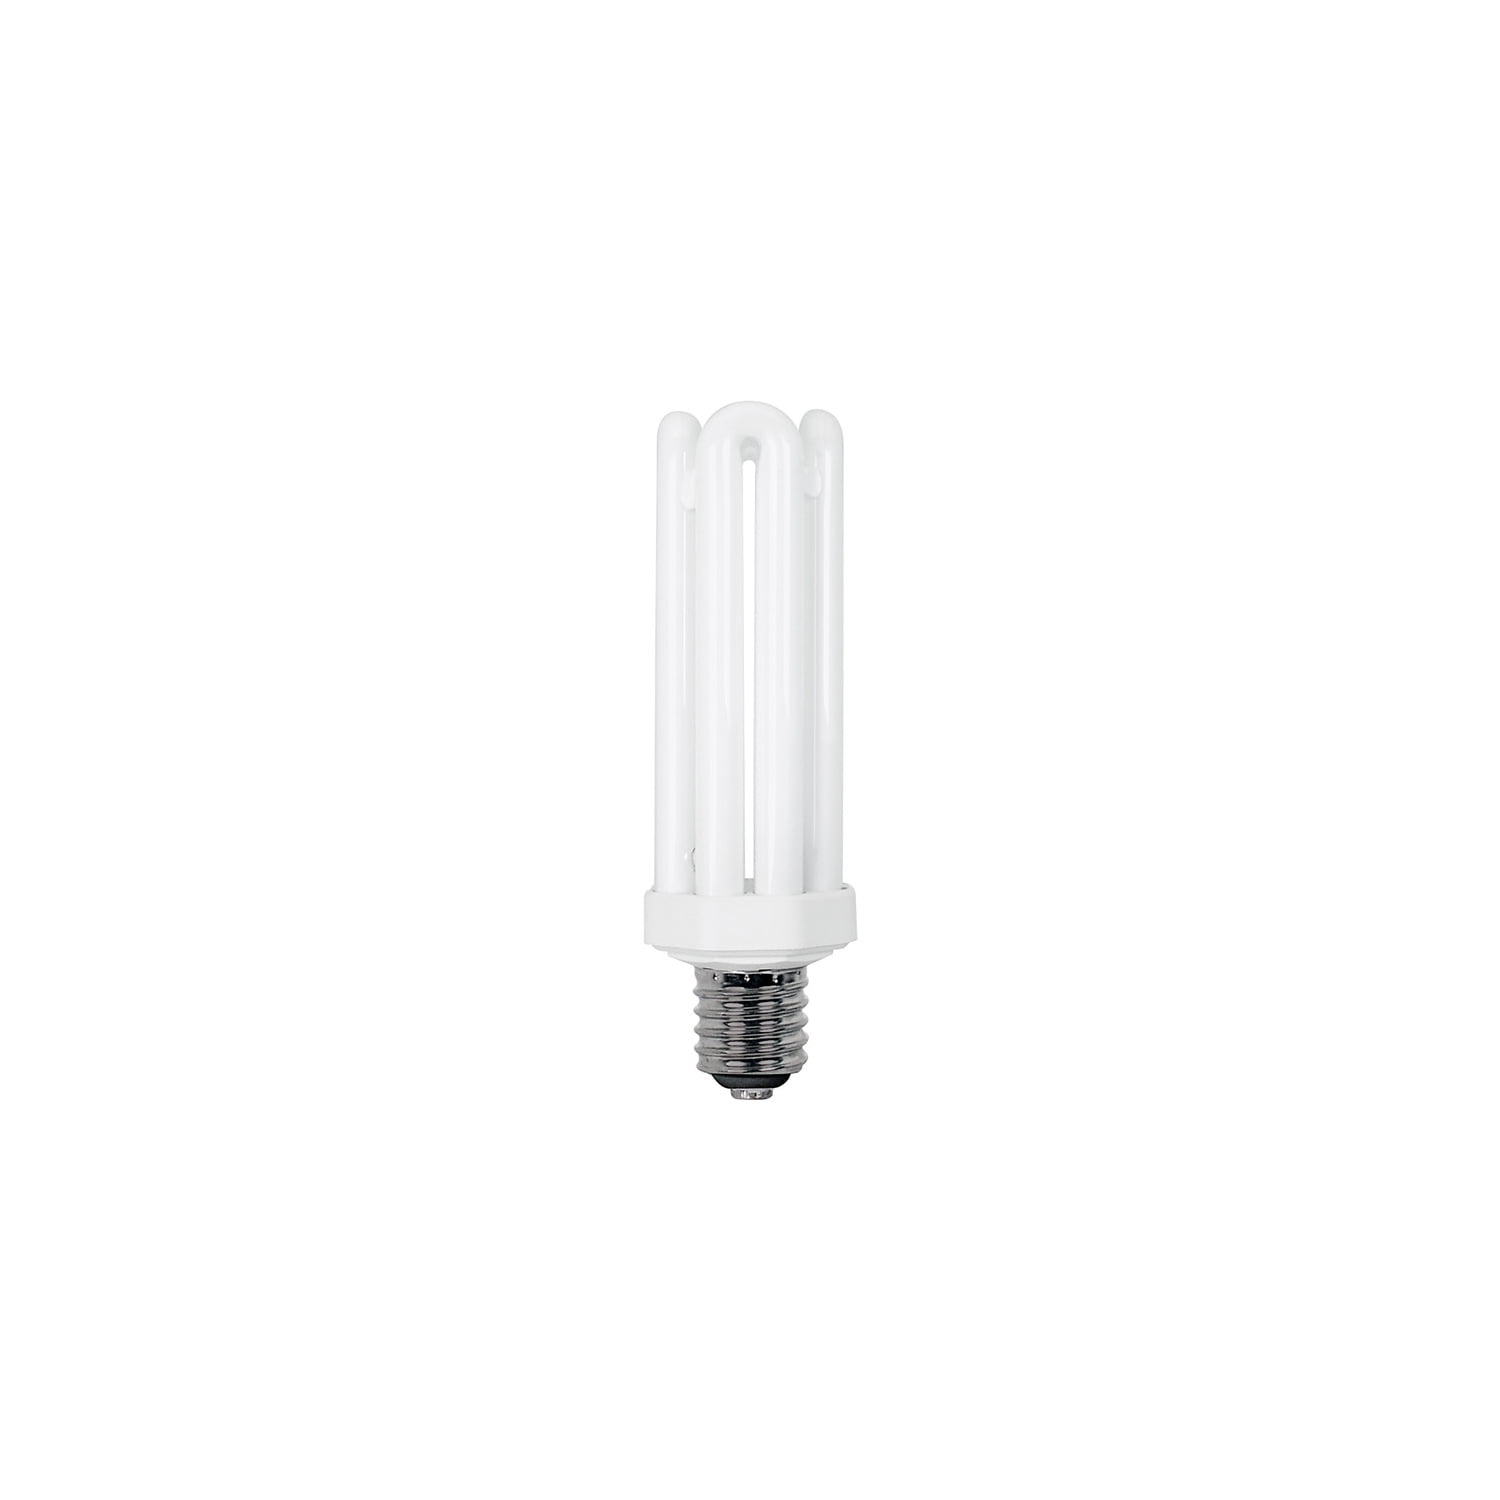 REPLACEMENT BULB FOR DESIGNERS EDGE L765 65W 